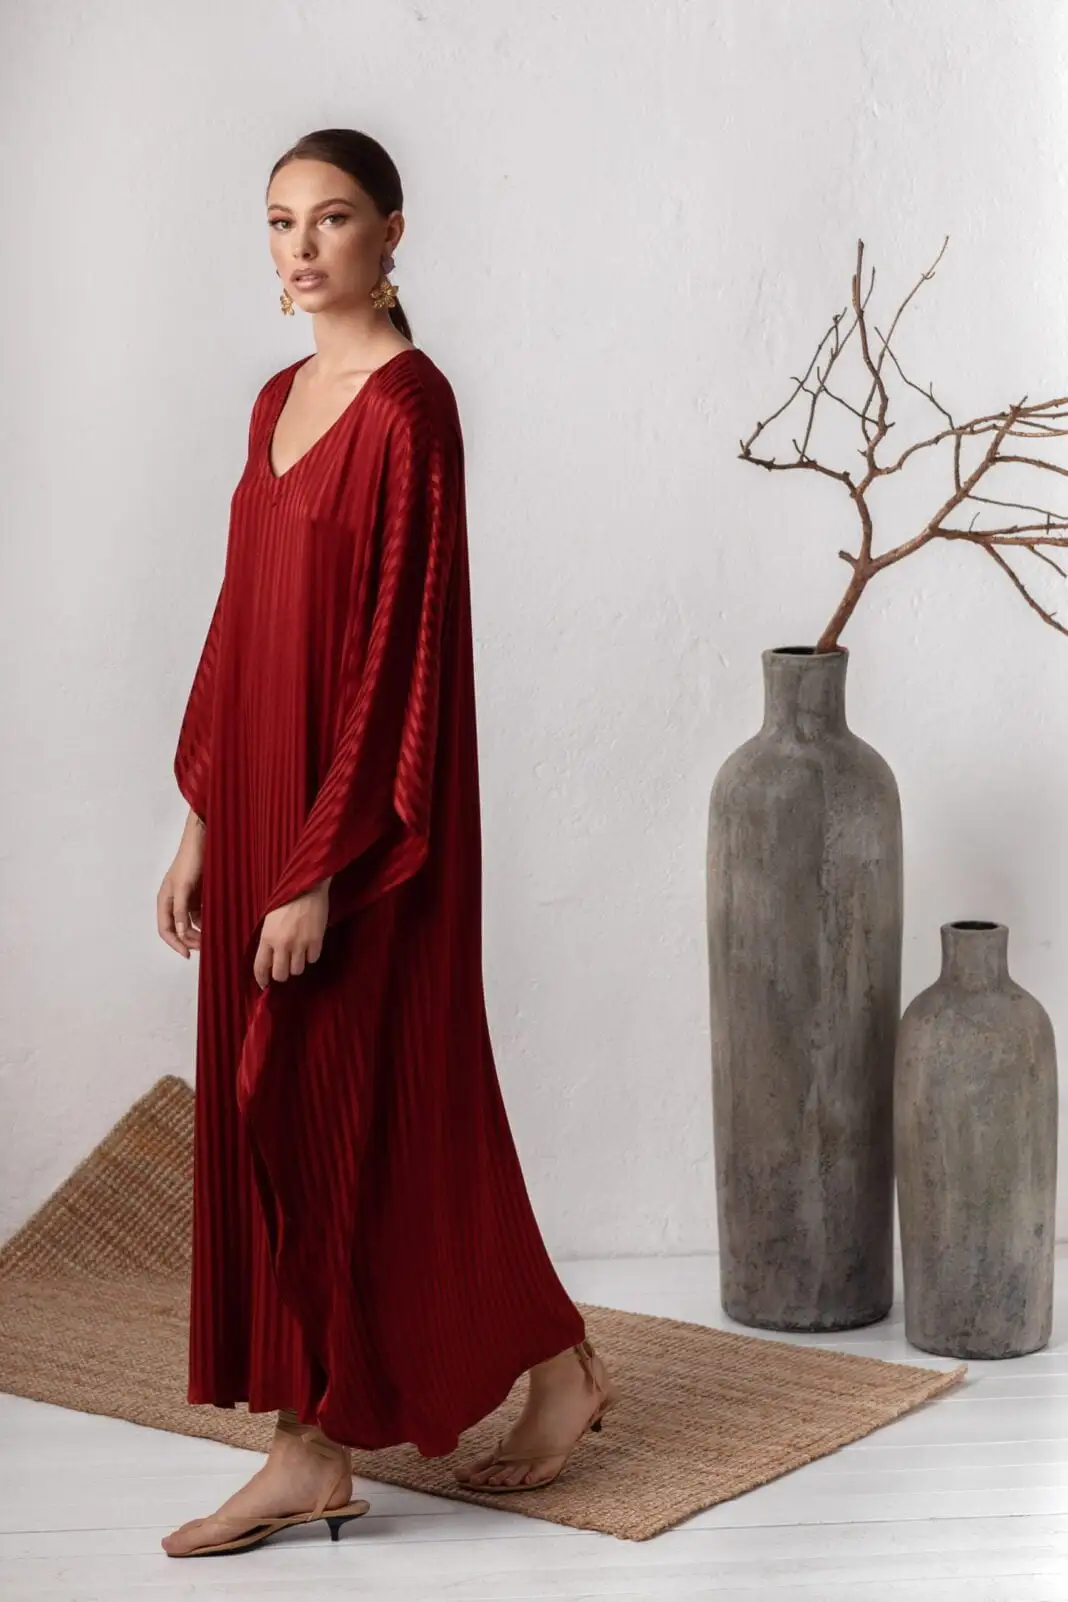 Women wearing red wine color loose maxi dress by house of azoiia